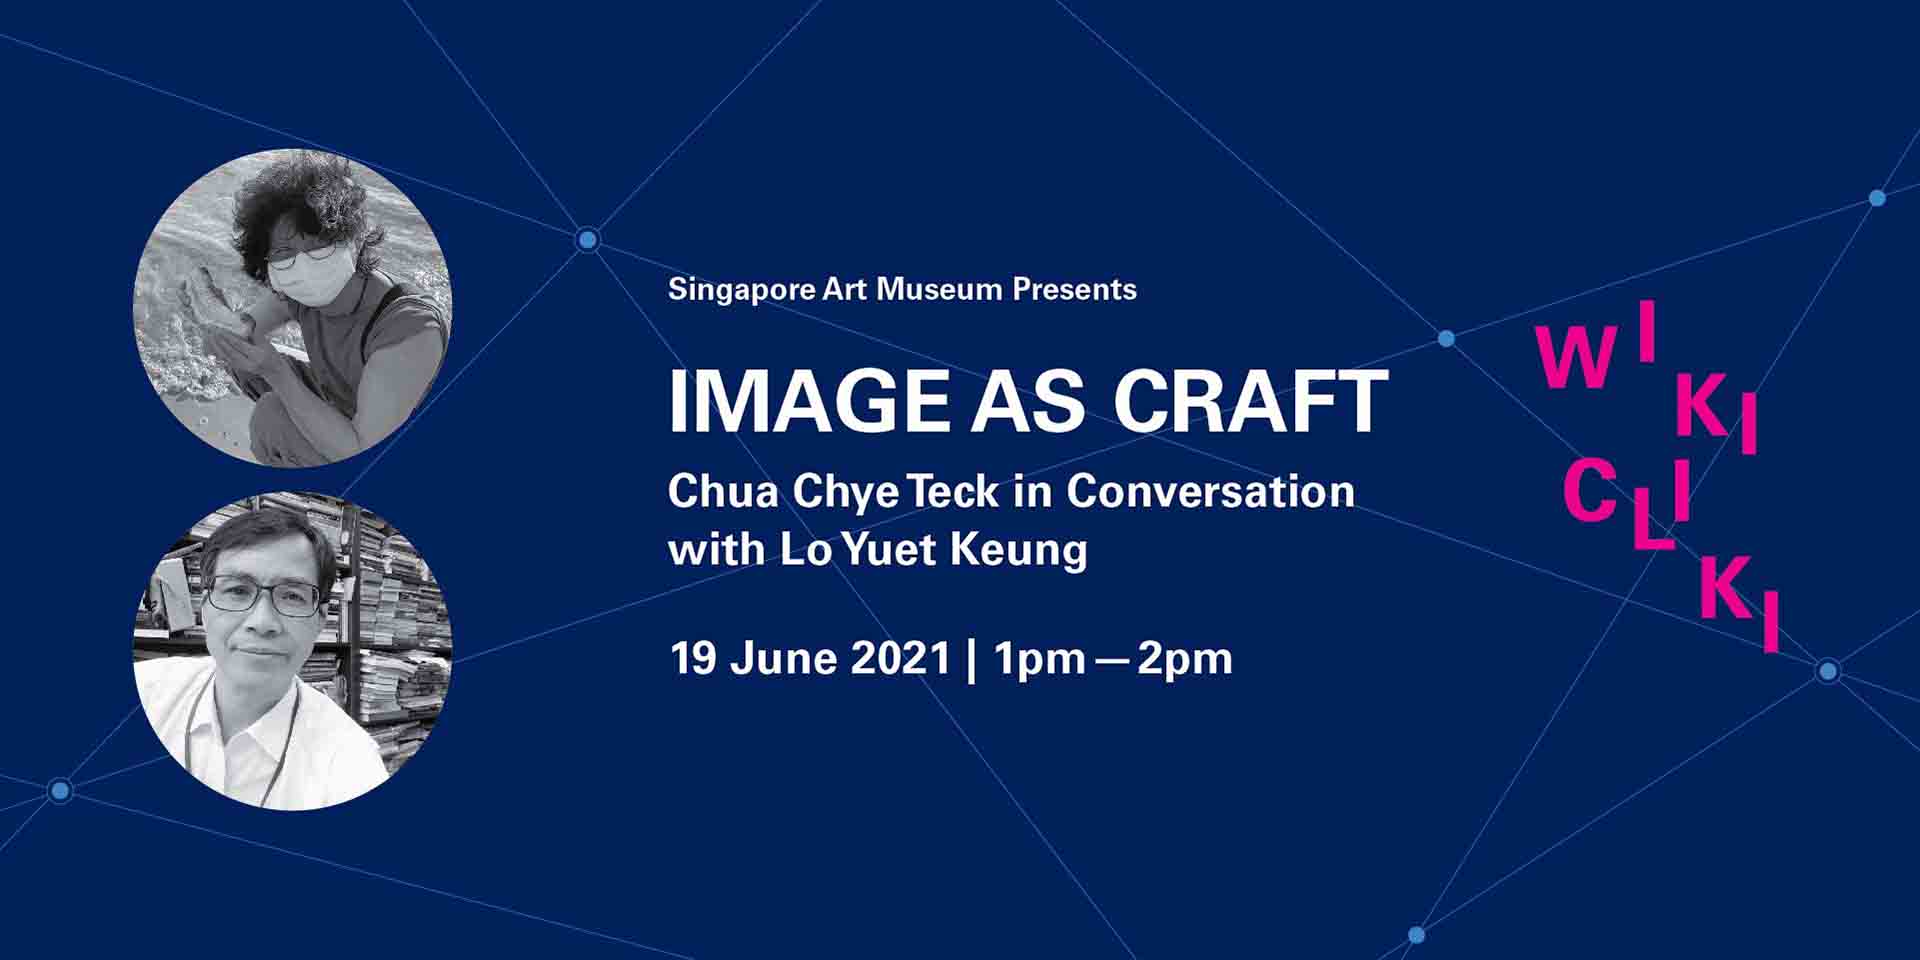 Image as Craft – Chua Chye Teck in Conversation with Lo Yuet Keung